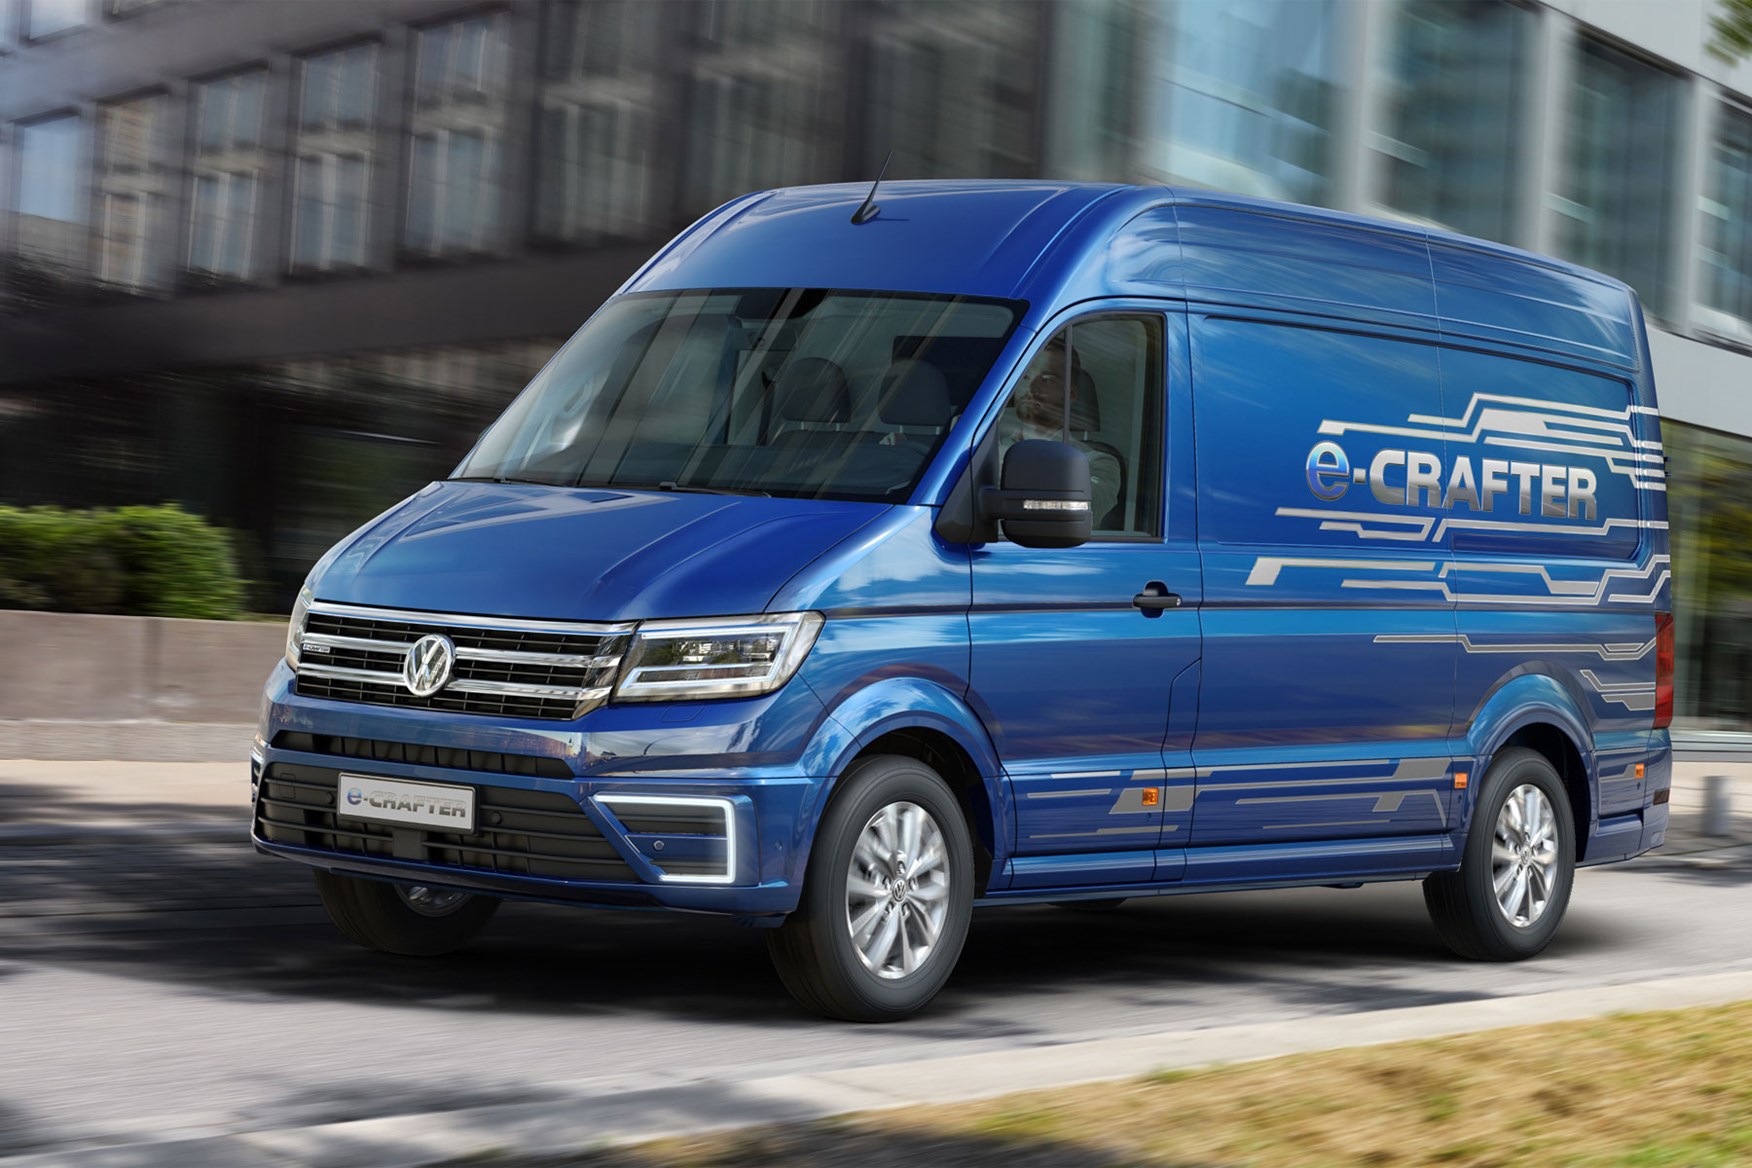 VW e-Crafter electric van - on sale in the UK in 2021